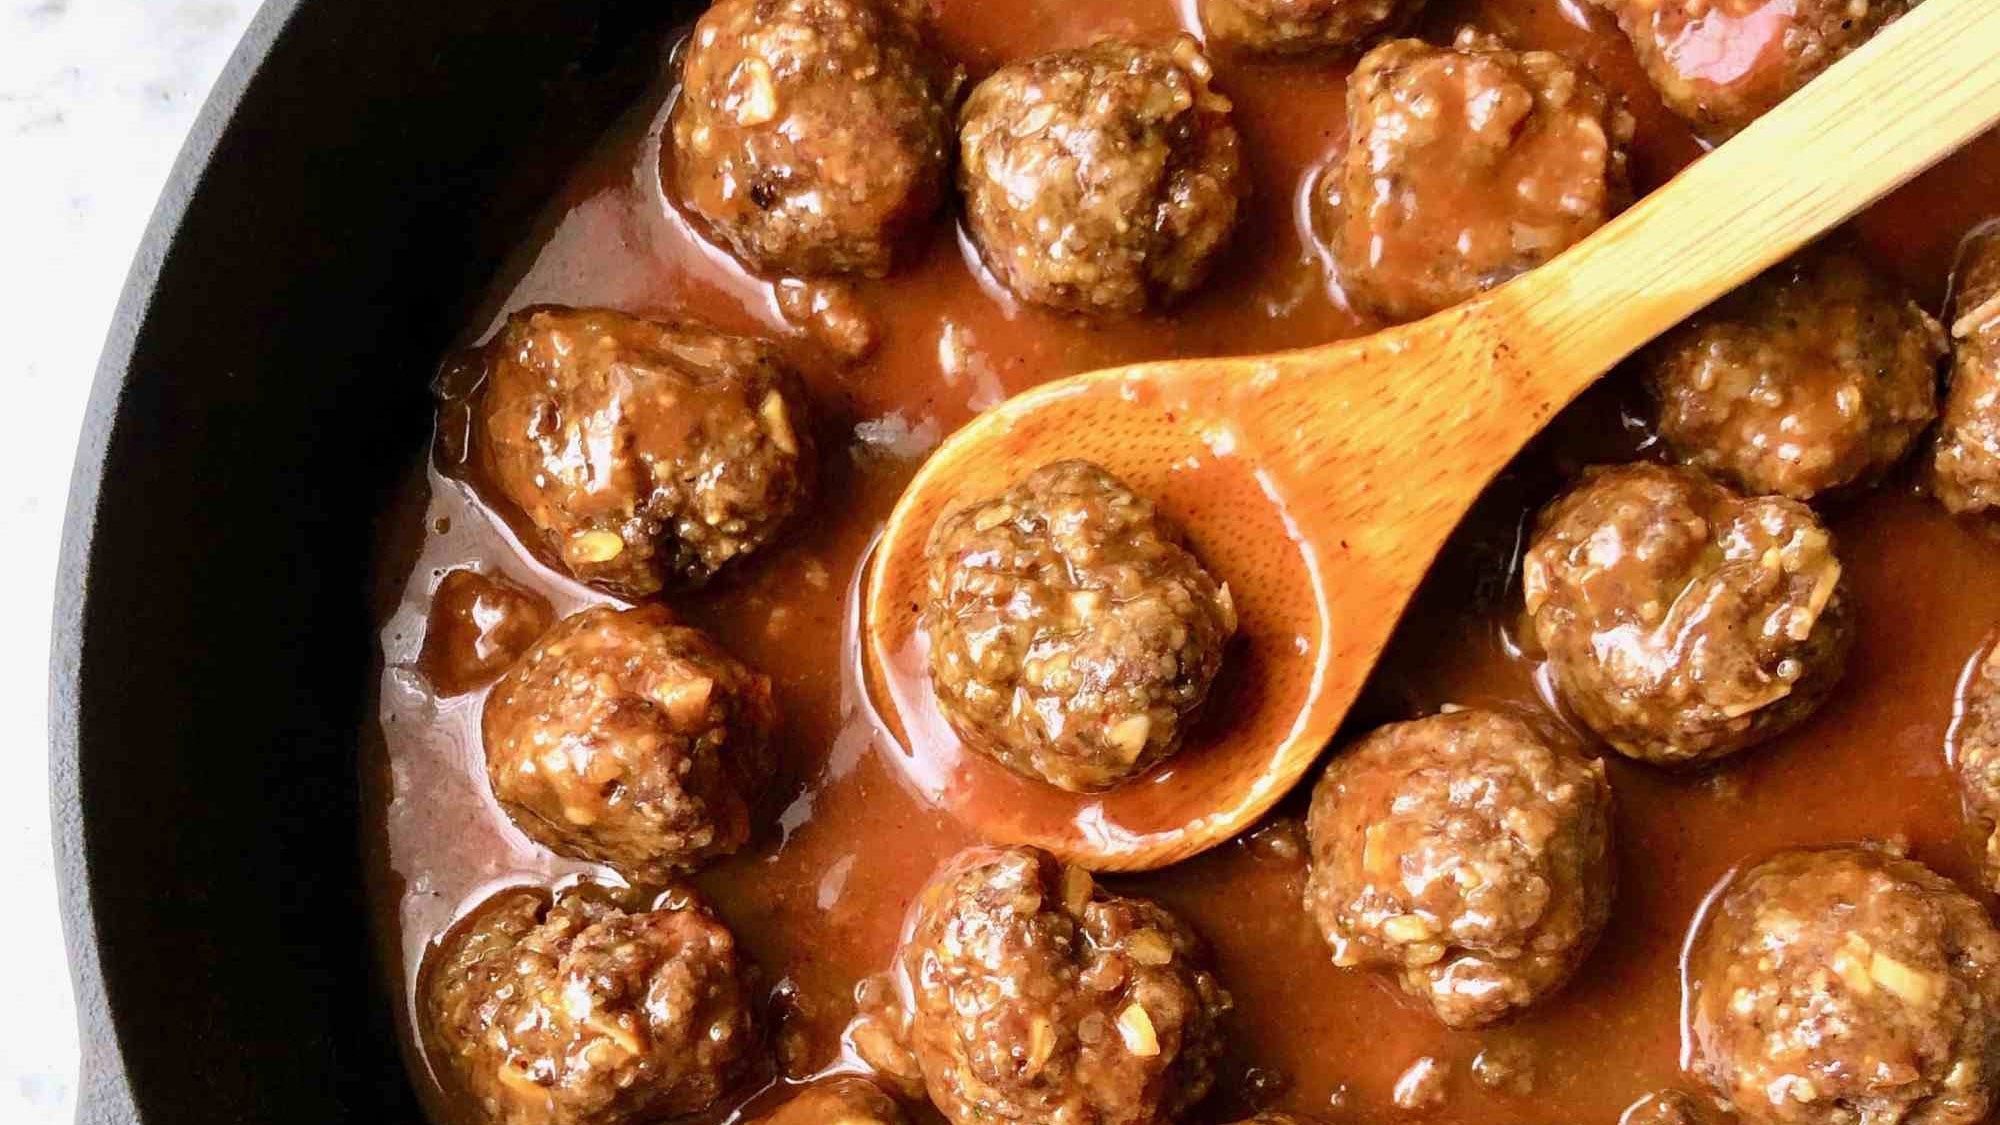 Tailgate Meatballs for NFL game day: Try the recipe